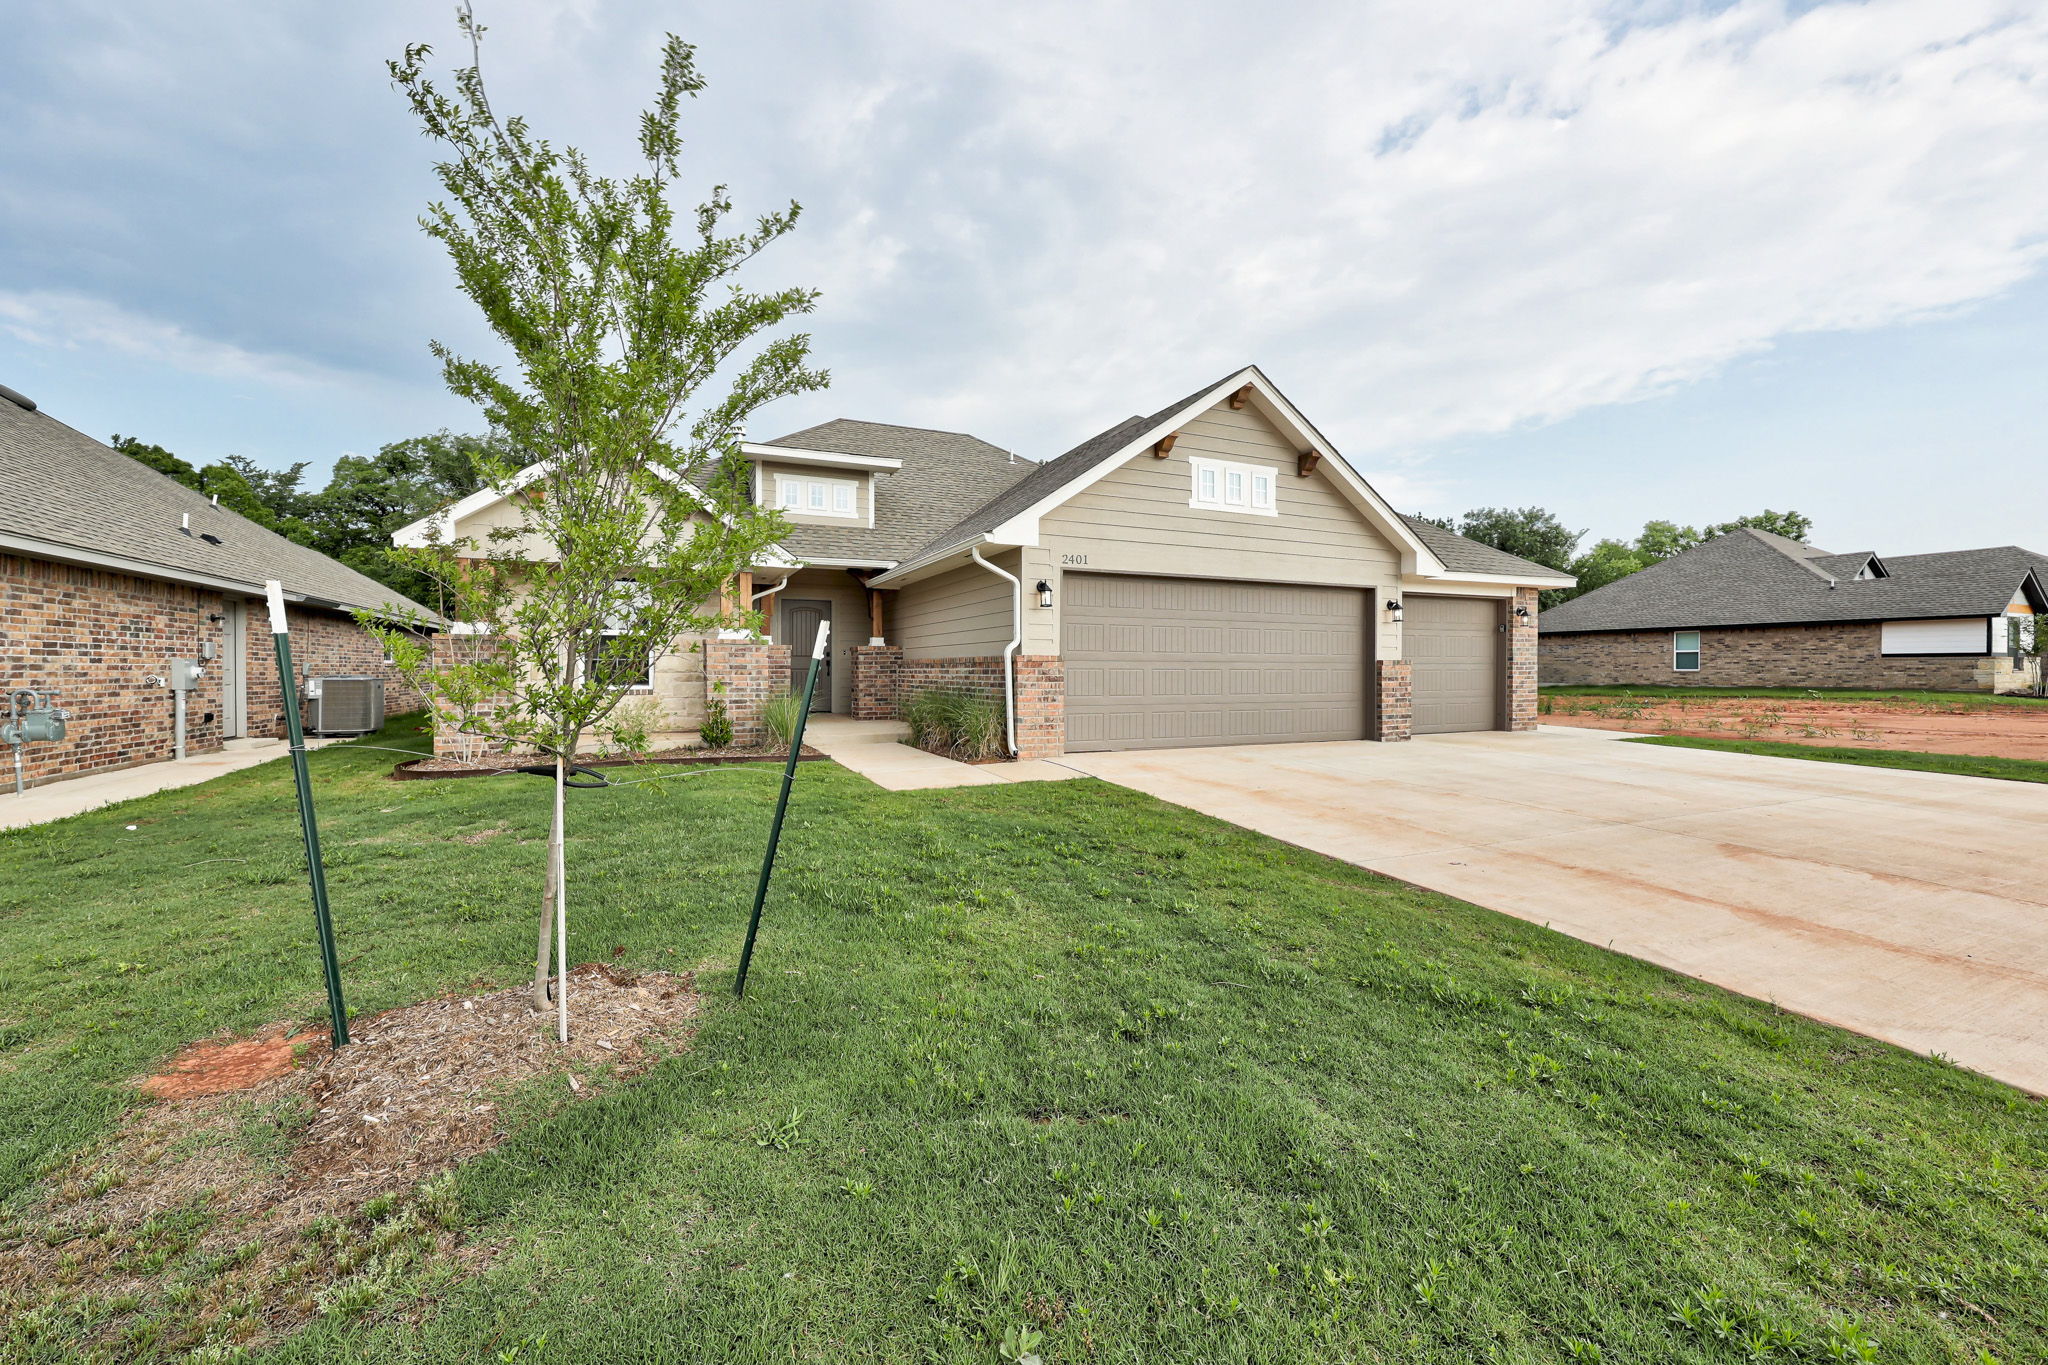 2401 Creekview Dr, Moore, Oklahoma 73160, 4 Bedrooms Bedrooms, ,2 BathroomsBathrooms,House,For Sale,Creekview Dr,1290